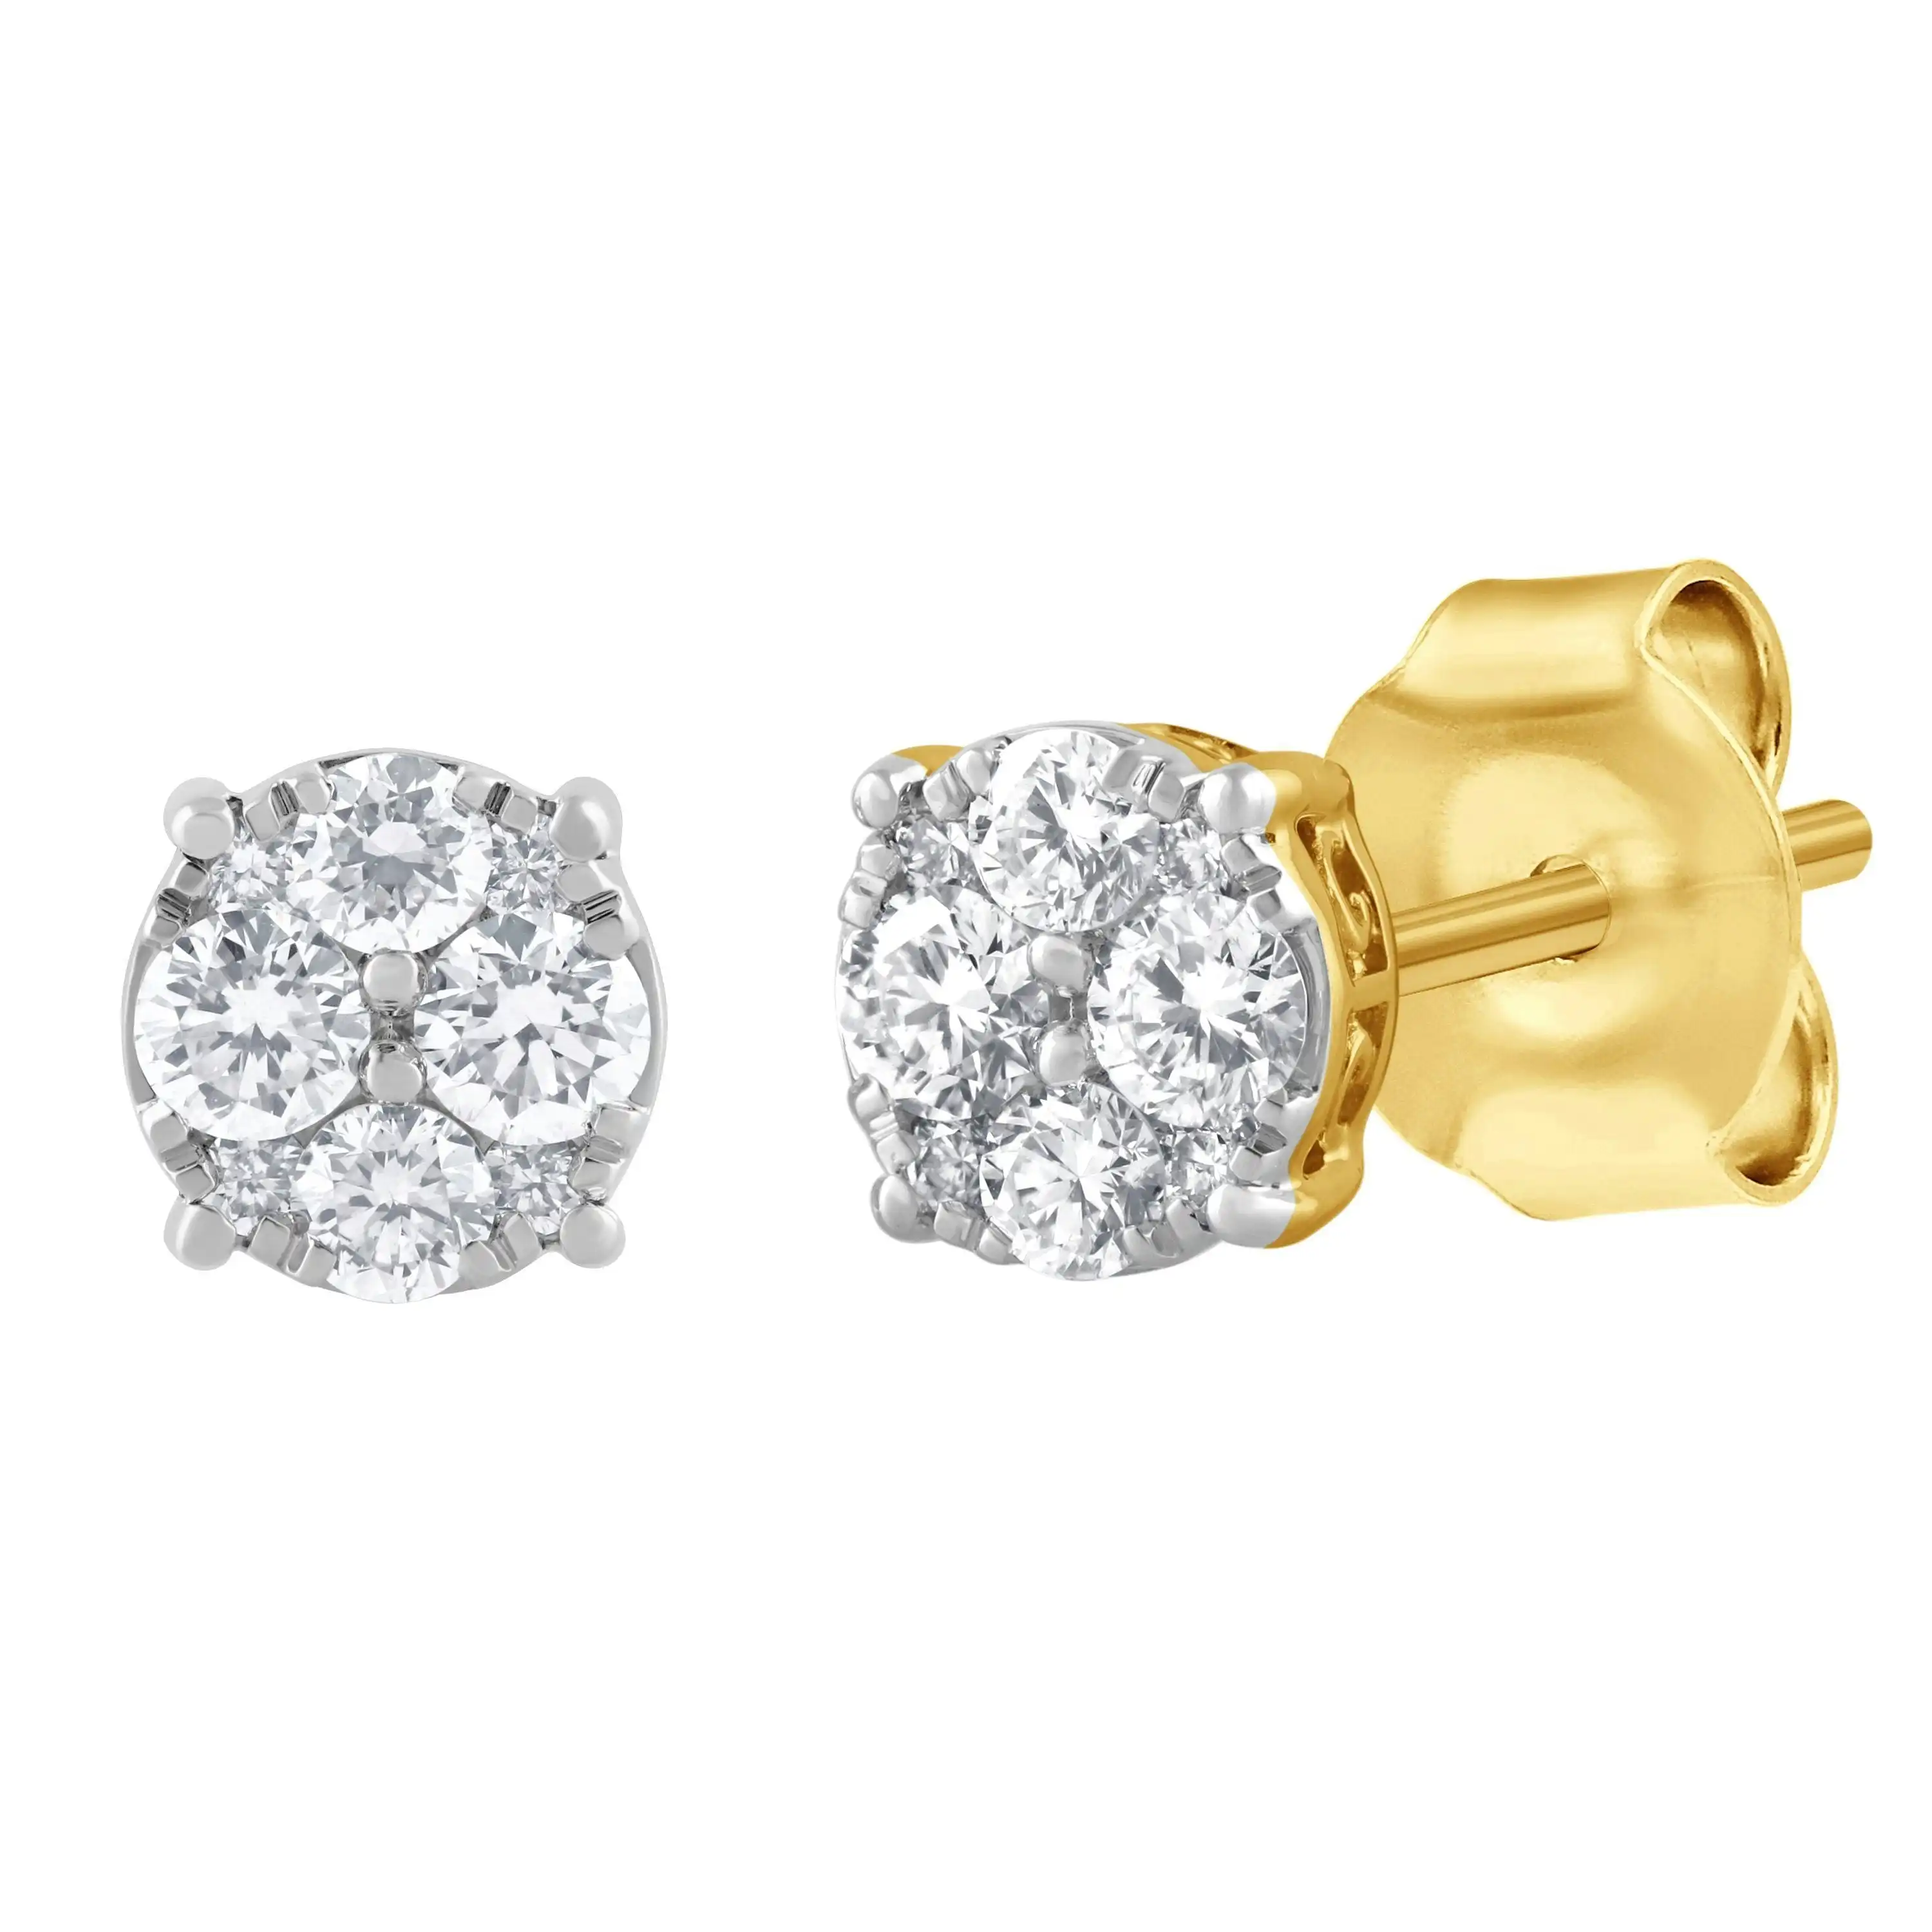 Meera Stud Earrings with 1/4ct of Laboratory Grown Diamonds in 9ct Yellow Gold